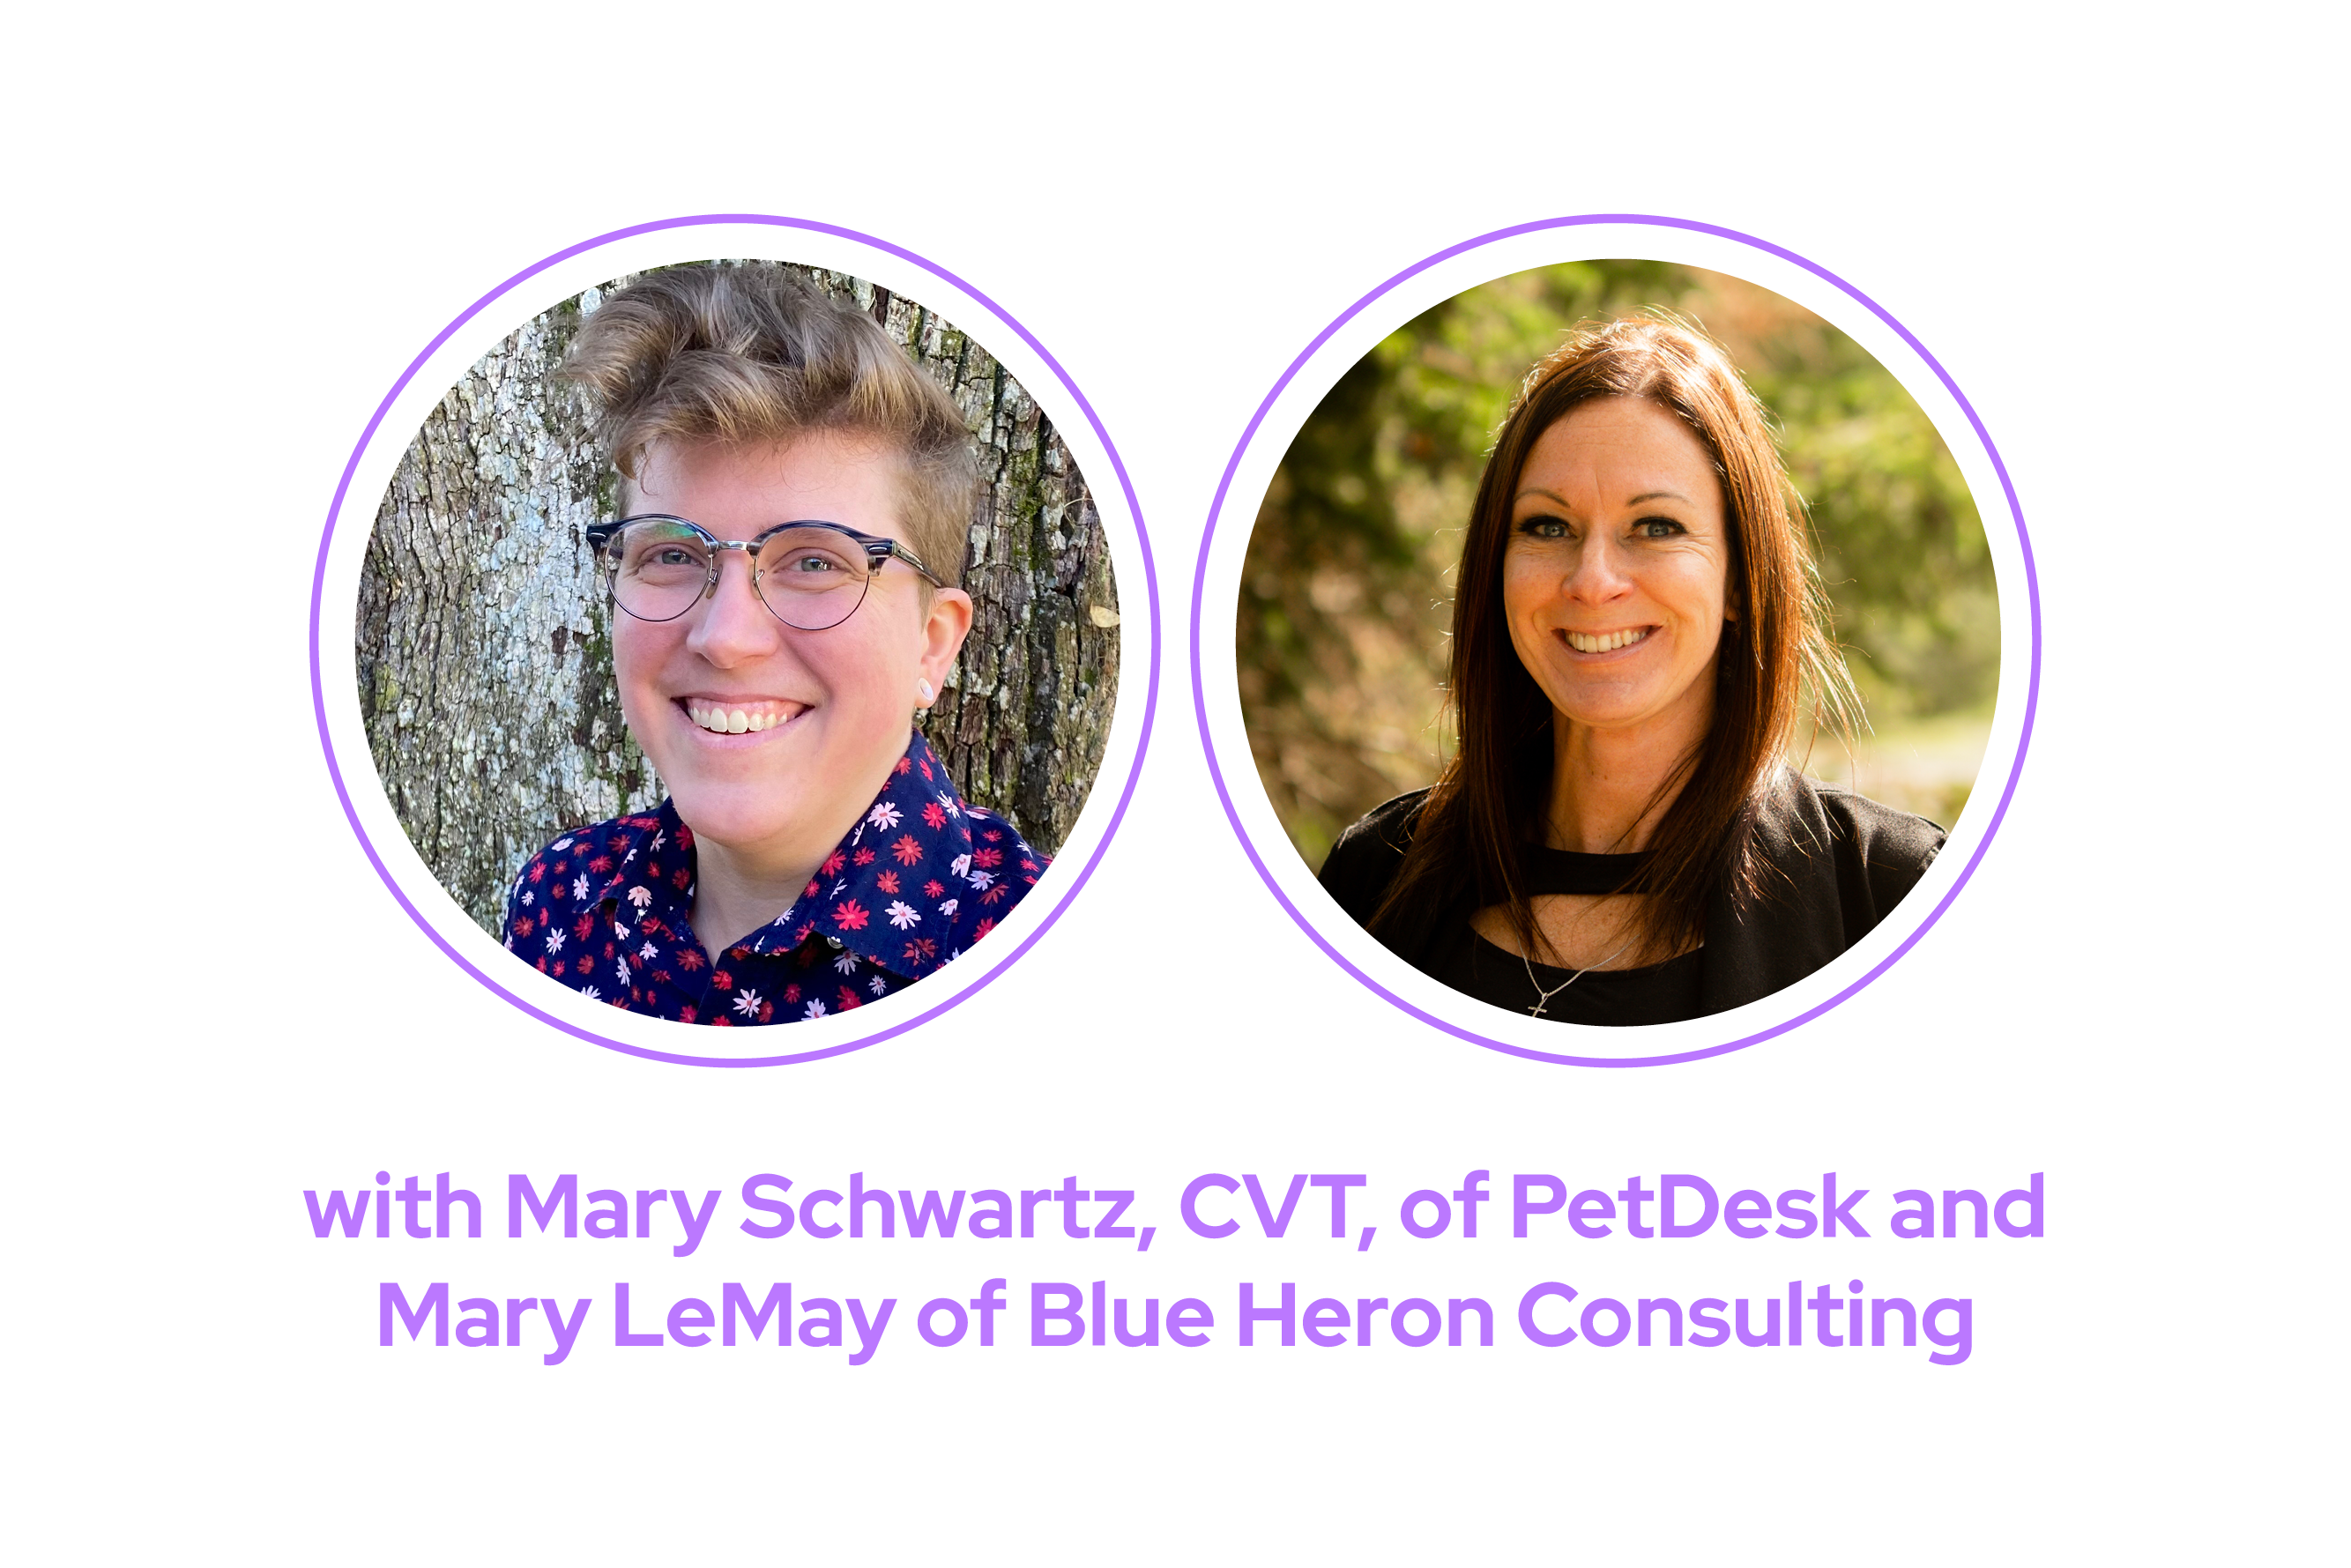 Live Webinar with Mary Schwartz and Mary LeMay